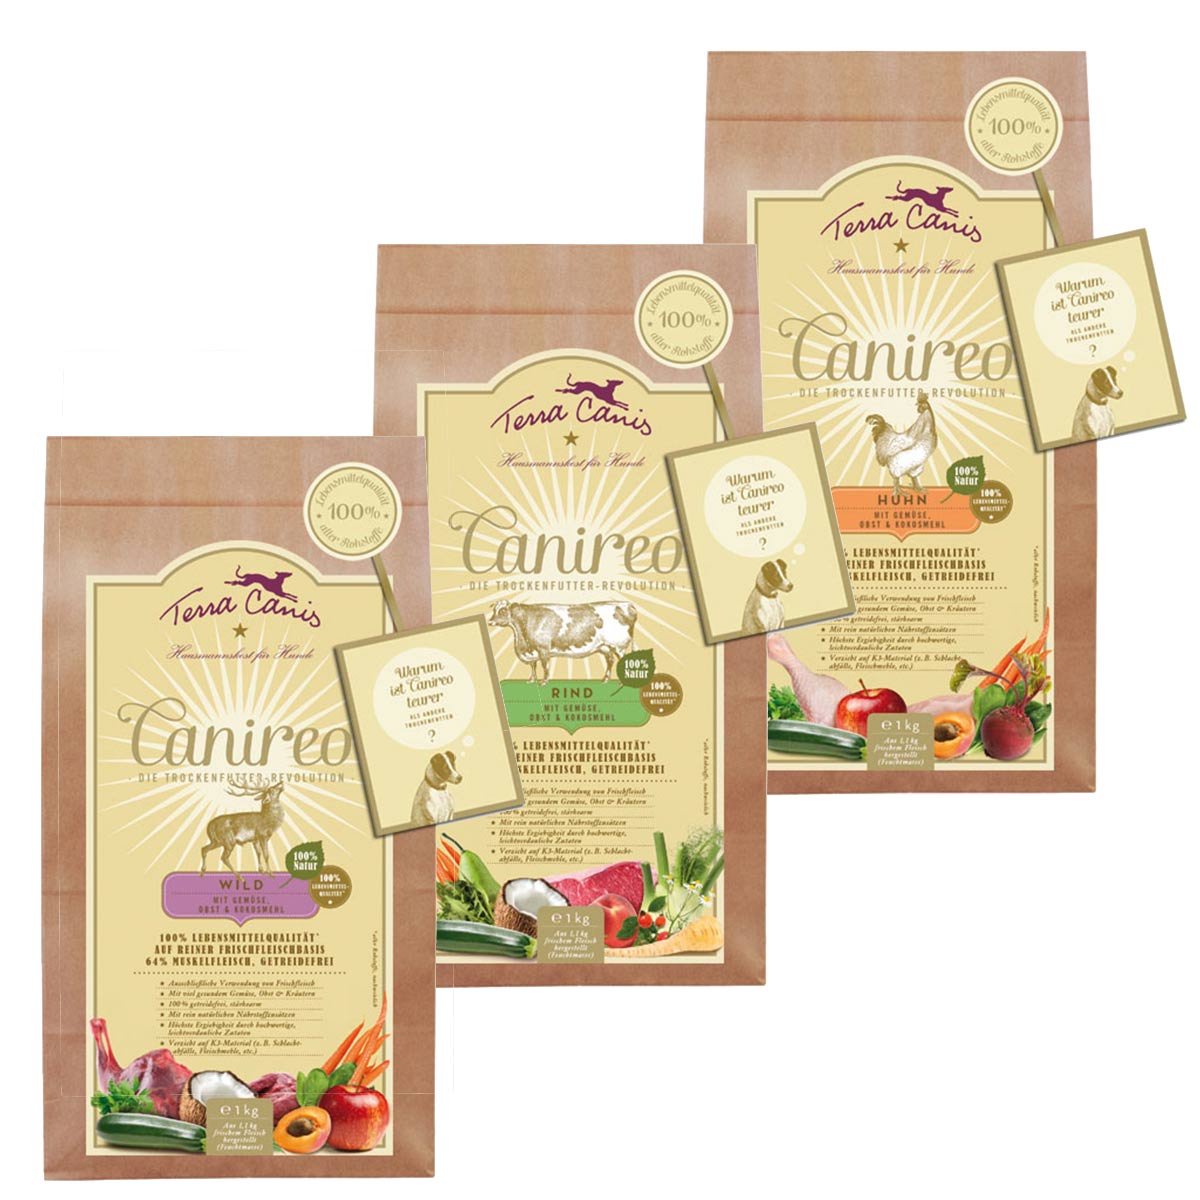 Terra Canis Canireo Mixpaket Huhn, Wild & Rind 3x1kg von Terra Canis